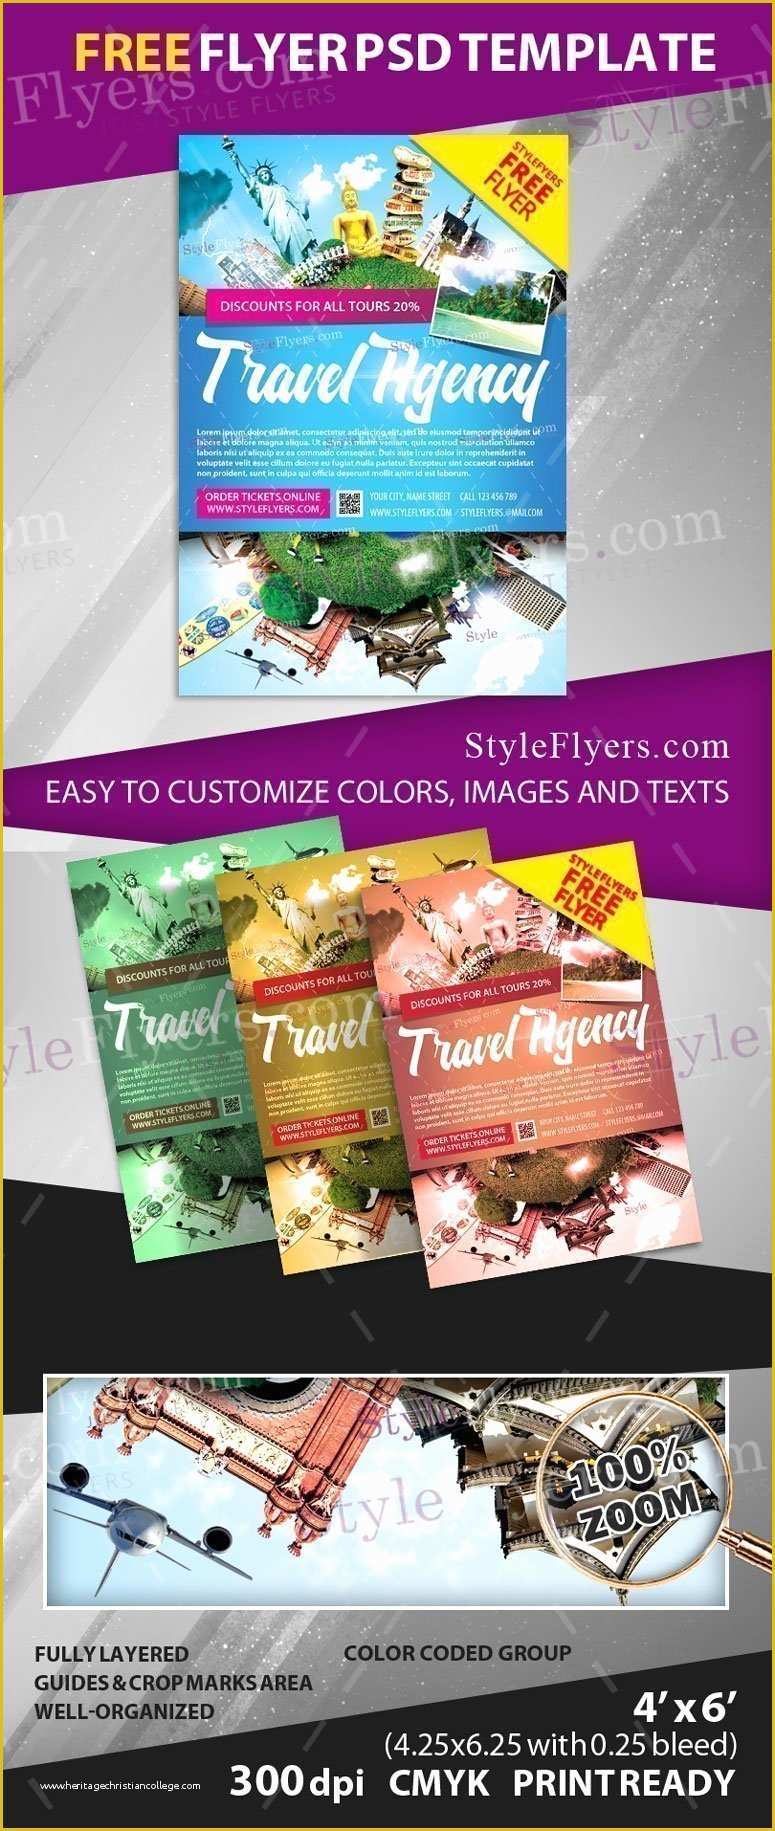 Travel Flyer Template Free Of Travel Agency Free Psd Flyer Template Free Download